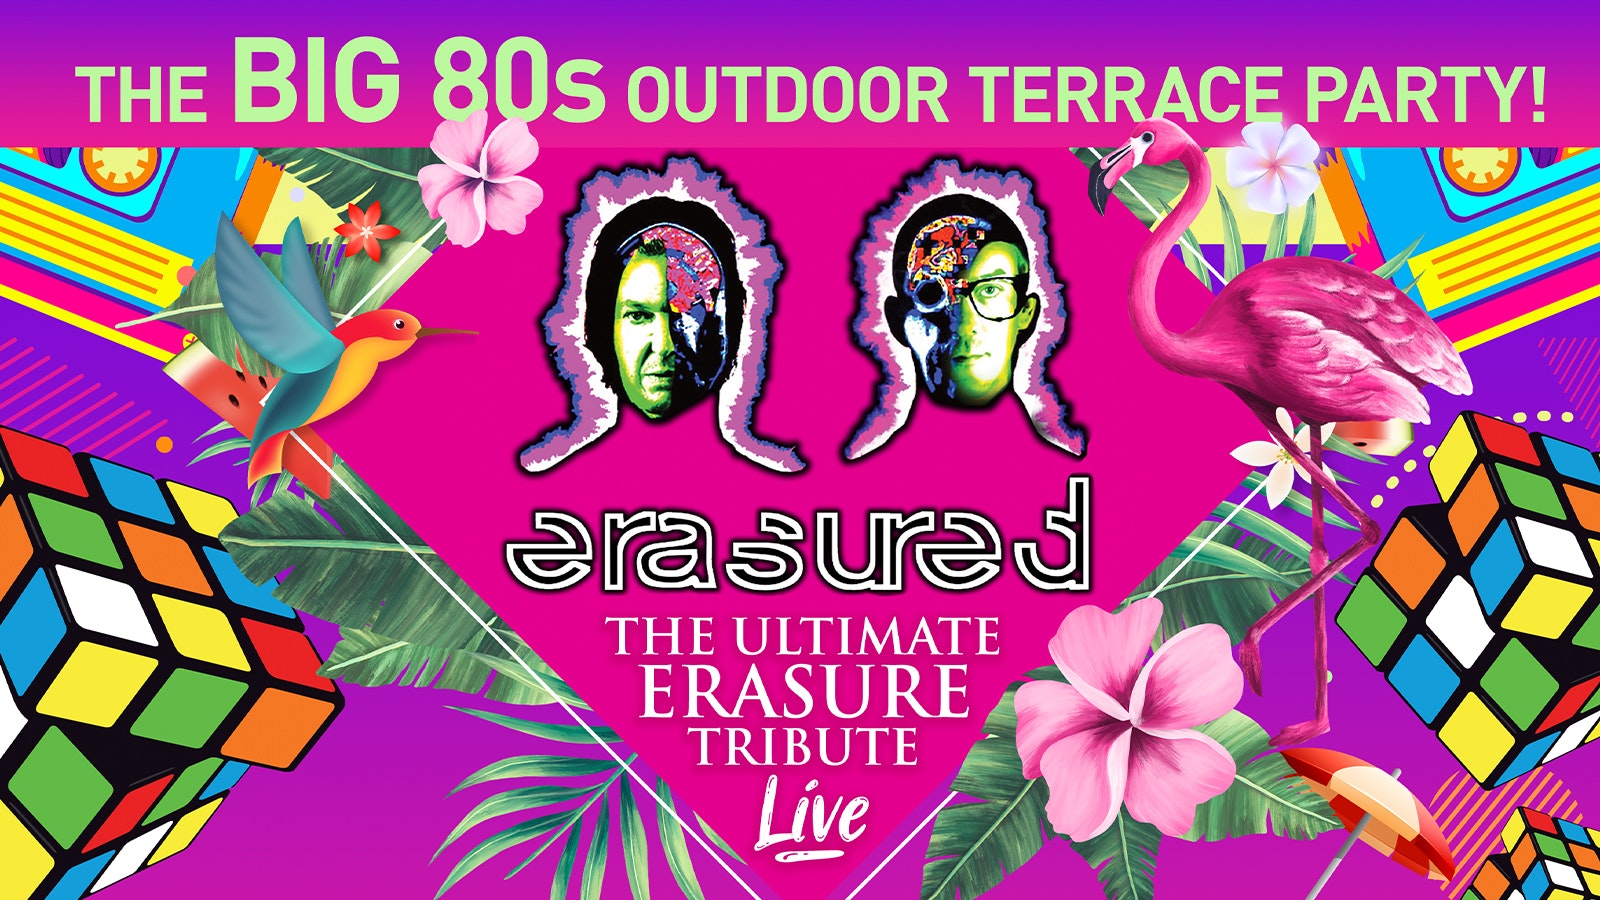 BIG 80s OUTDOOR TERRACE PARTY LIVE ft ERASURE’S Greatest Hits & 80s Party